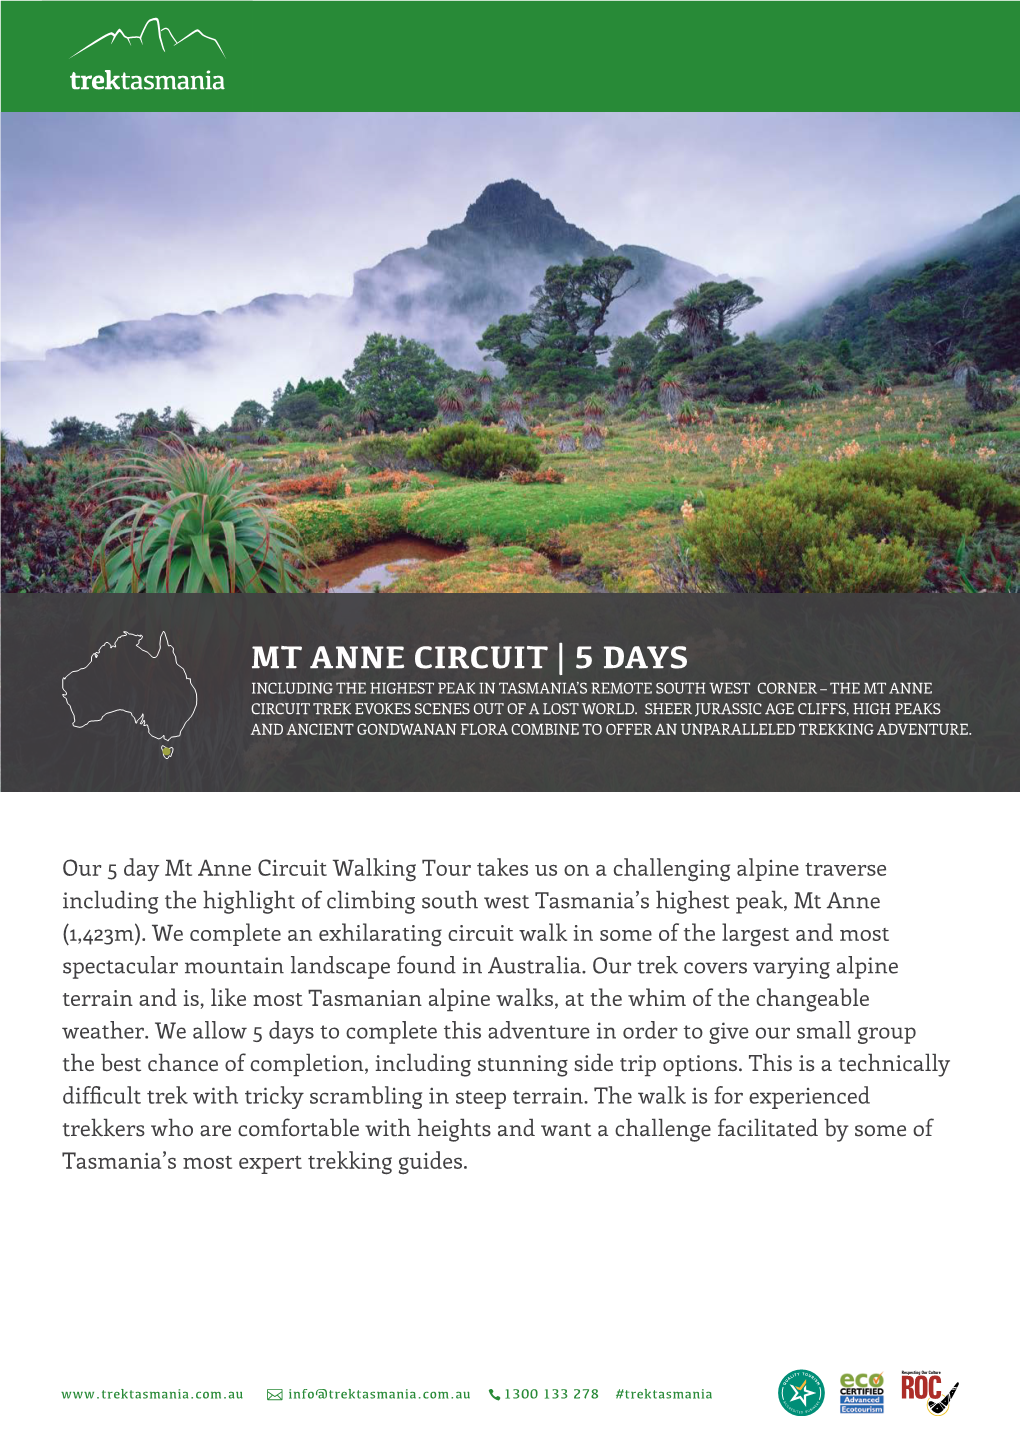 Mt Anne Circuit | 5 Days Including the Highest Peak in Tasmania’S Remote South West Corner – the Mt Anne Circuit Trek Evokes Scenes out of a Lost World